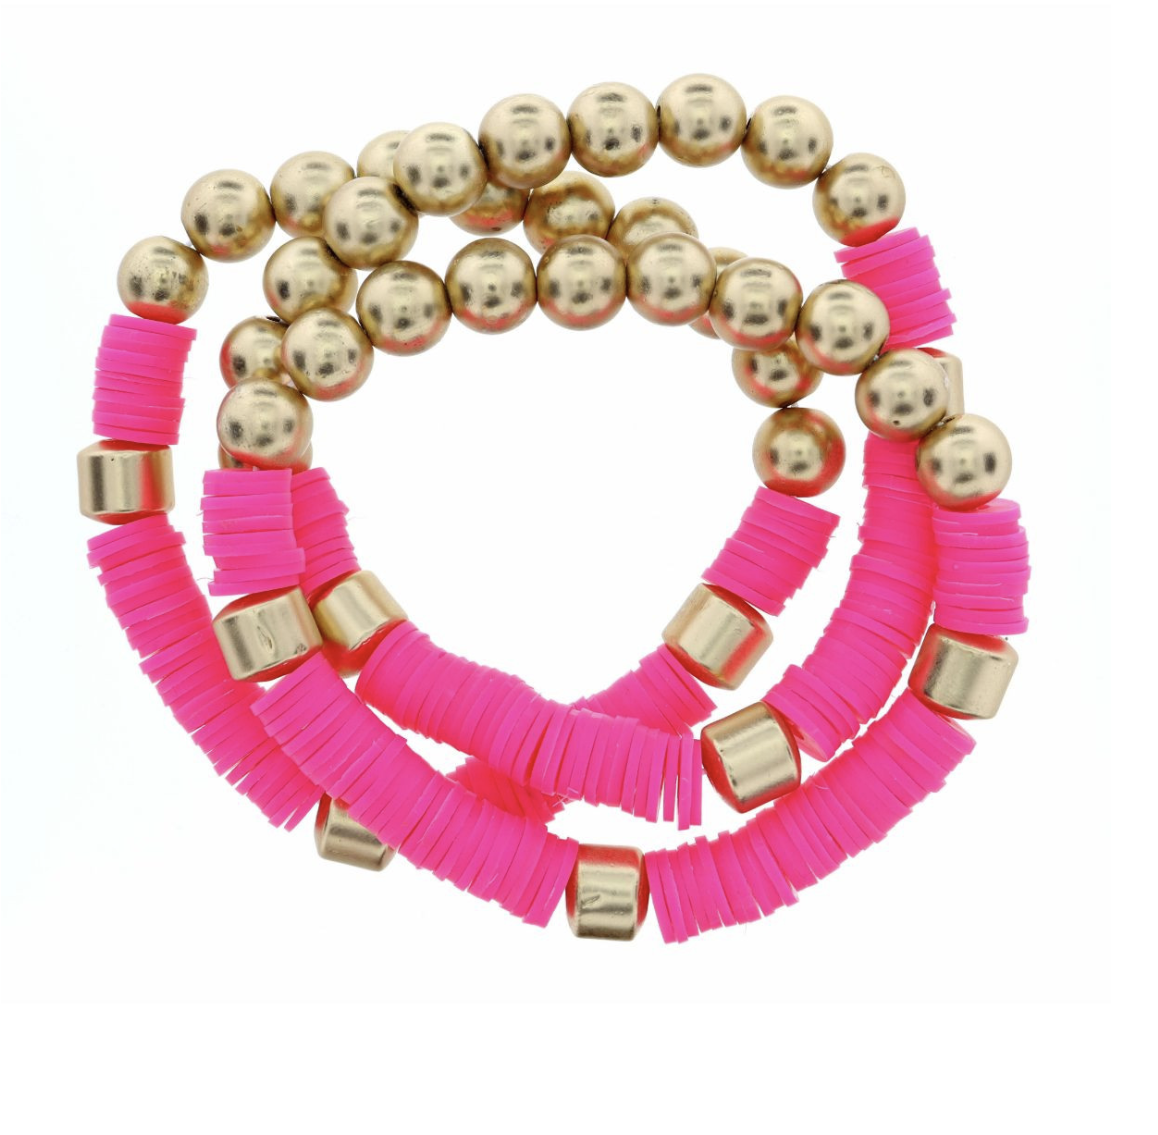 Jewelry - Bracelet - 3 Strand, Metal Beads + Hot Pink Rubber Sequins Stack